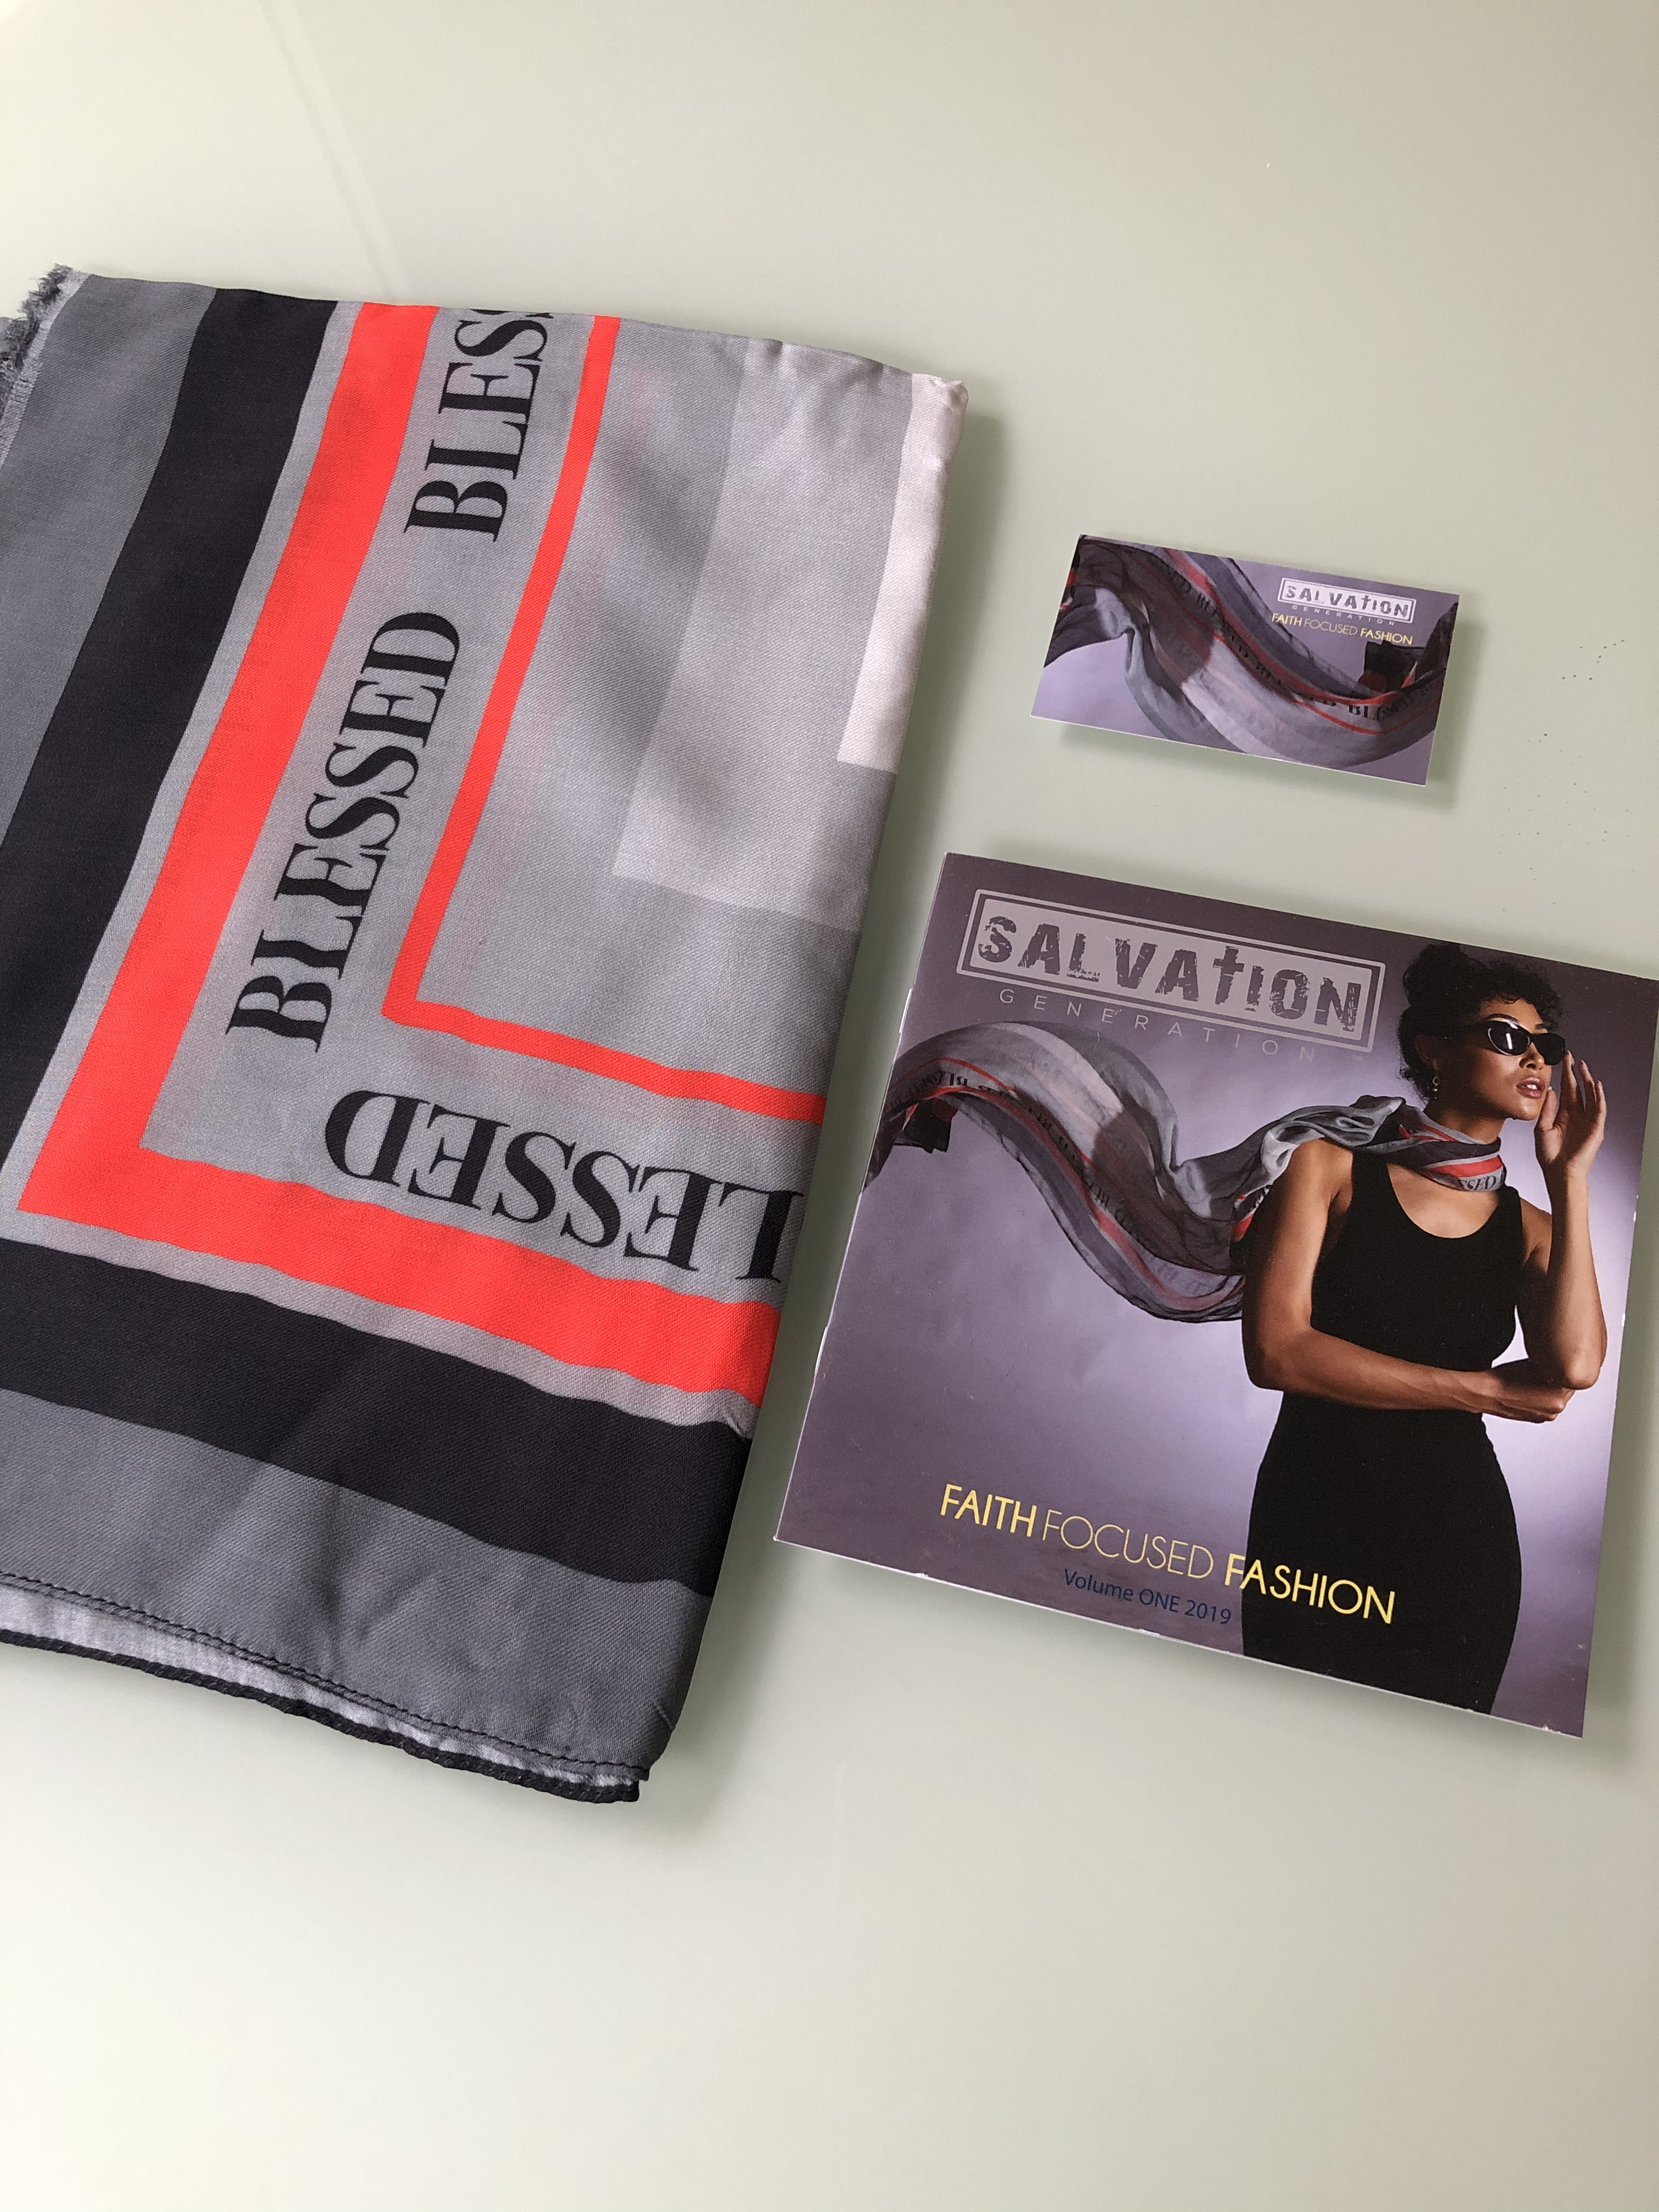 scarf, catalogue, business card